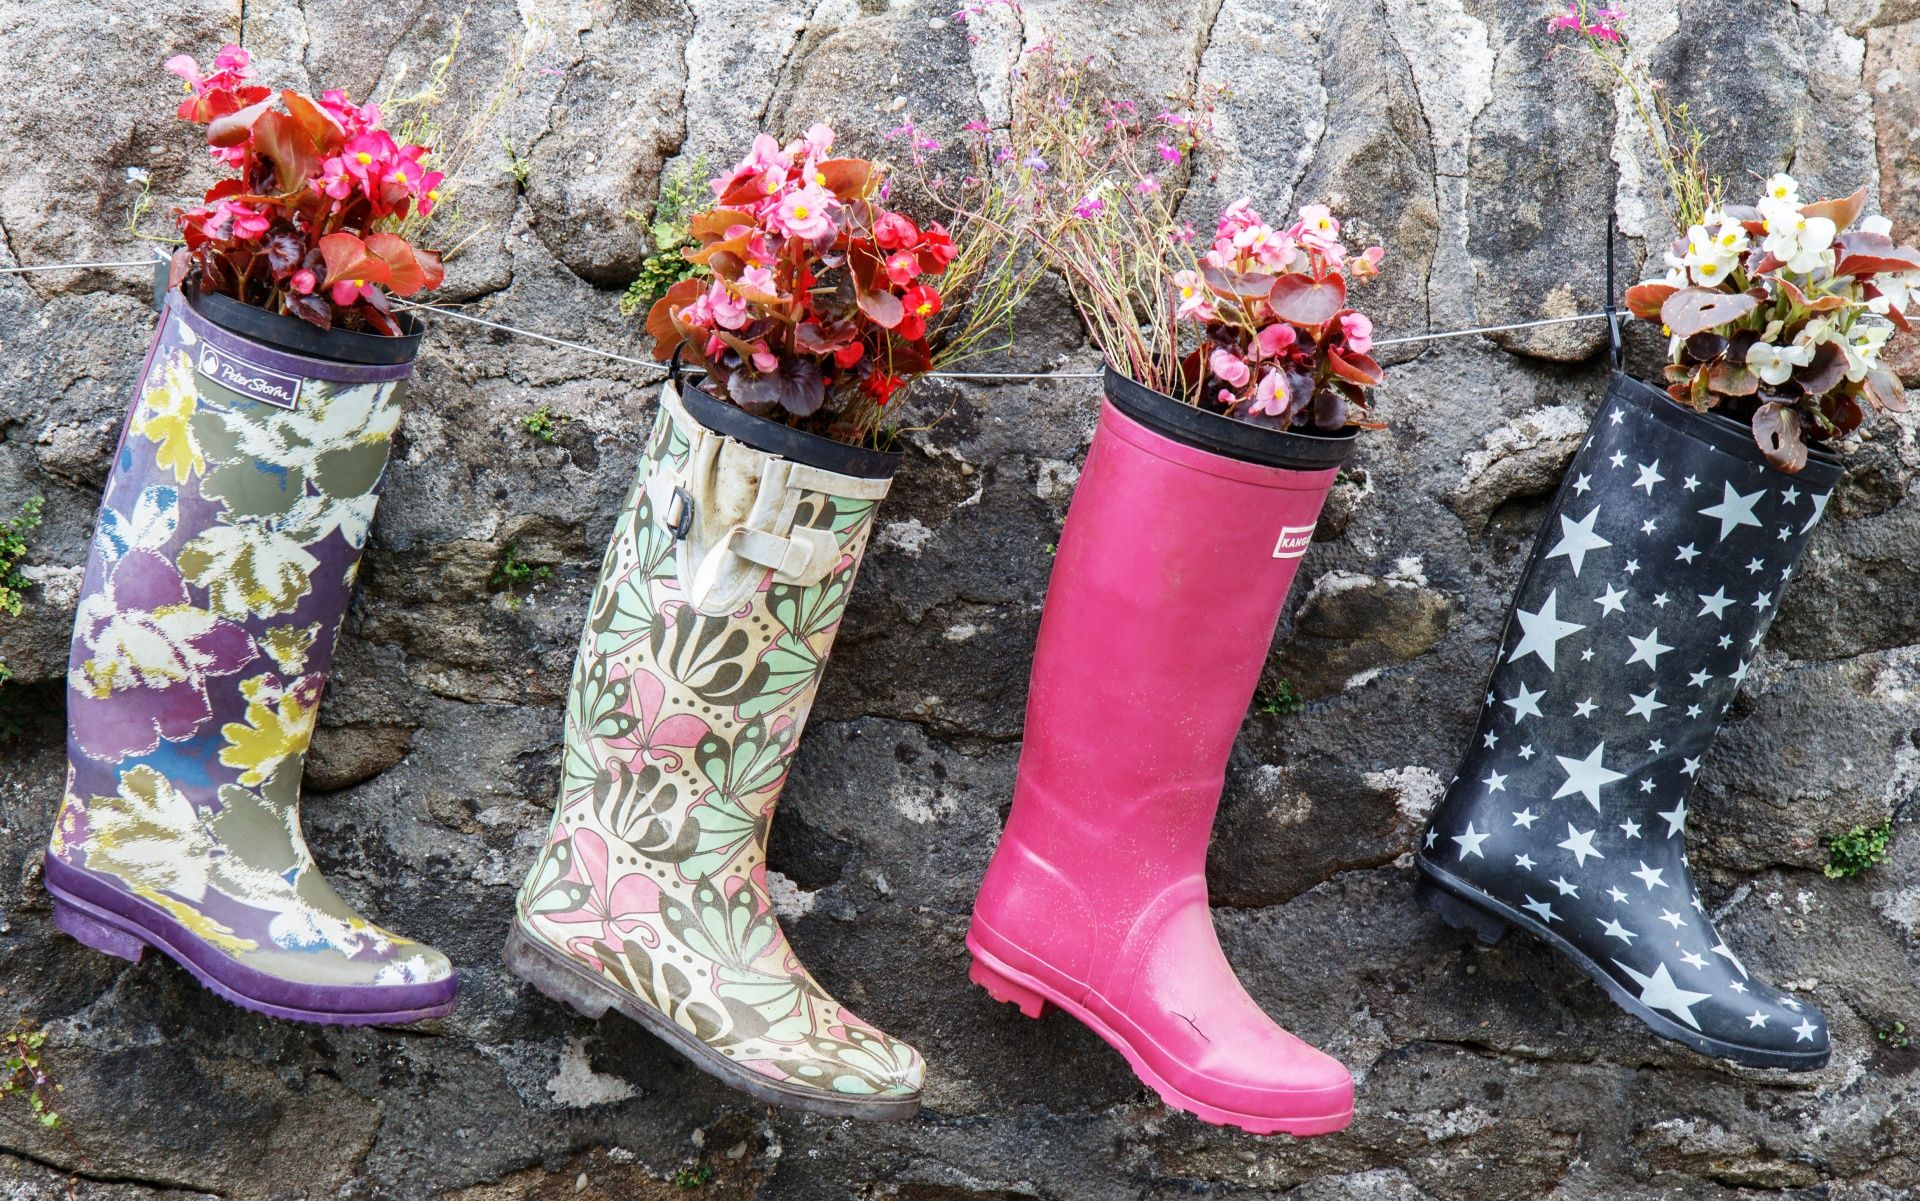 Flowers in welly boots